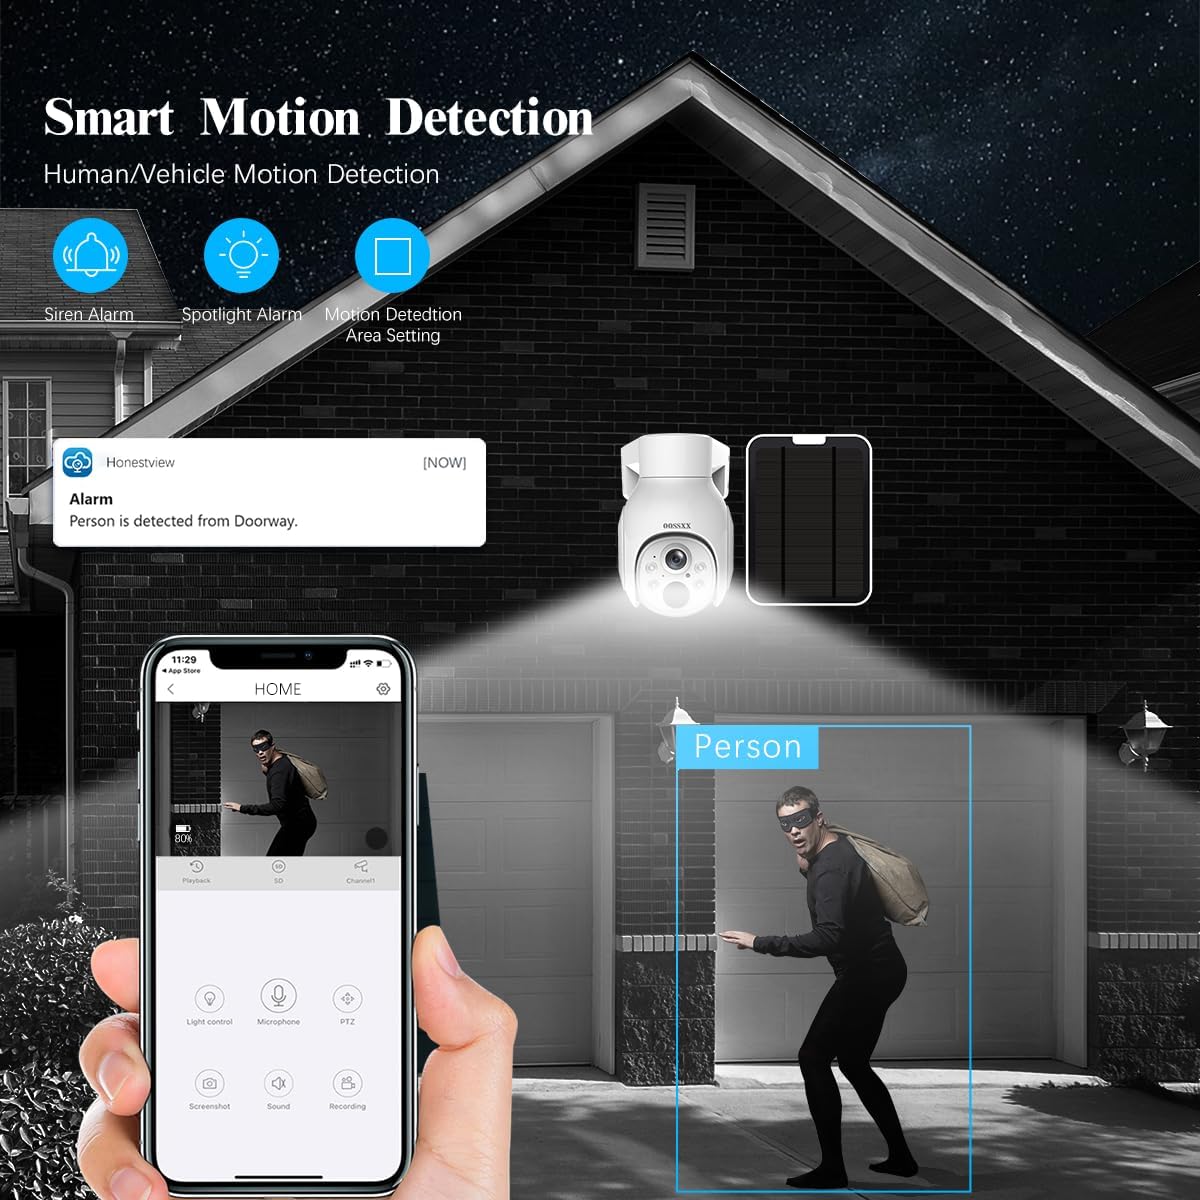 Security Cameras: Wire & Wireless Cameras for Home Security